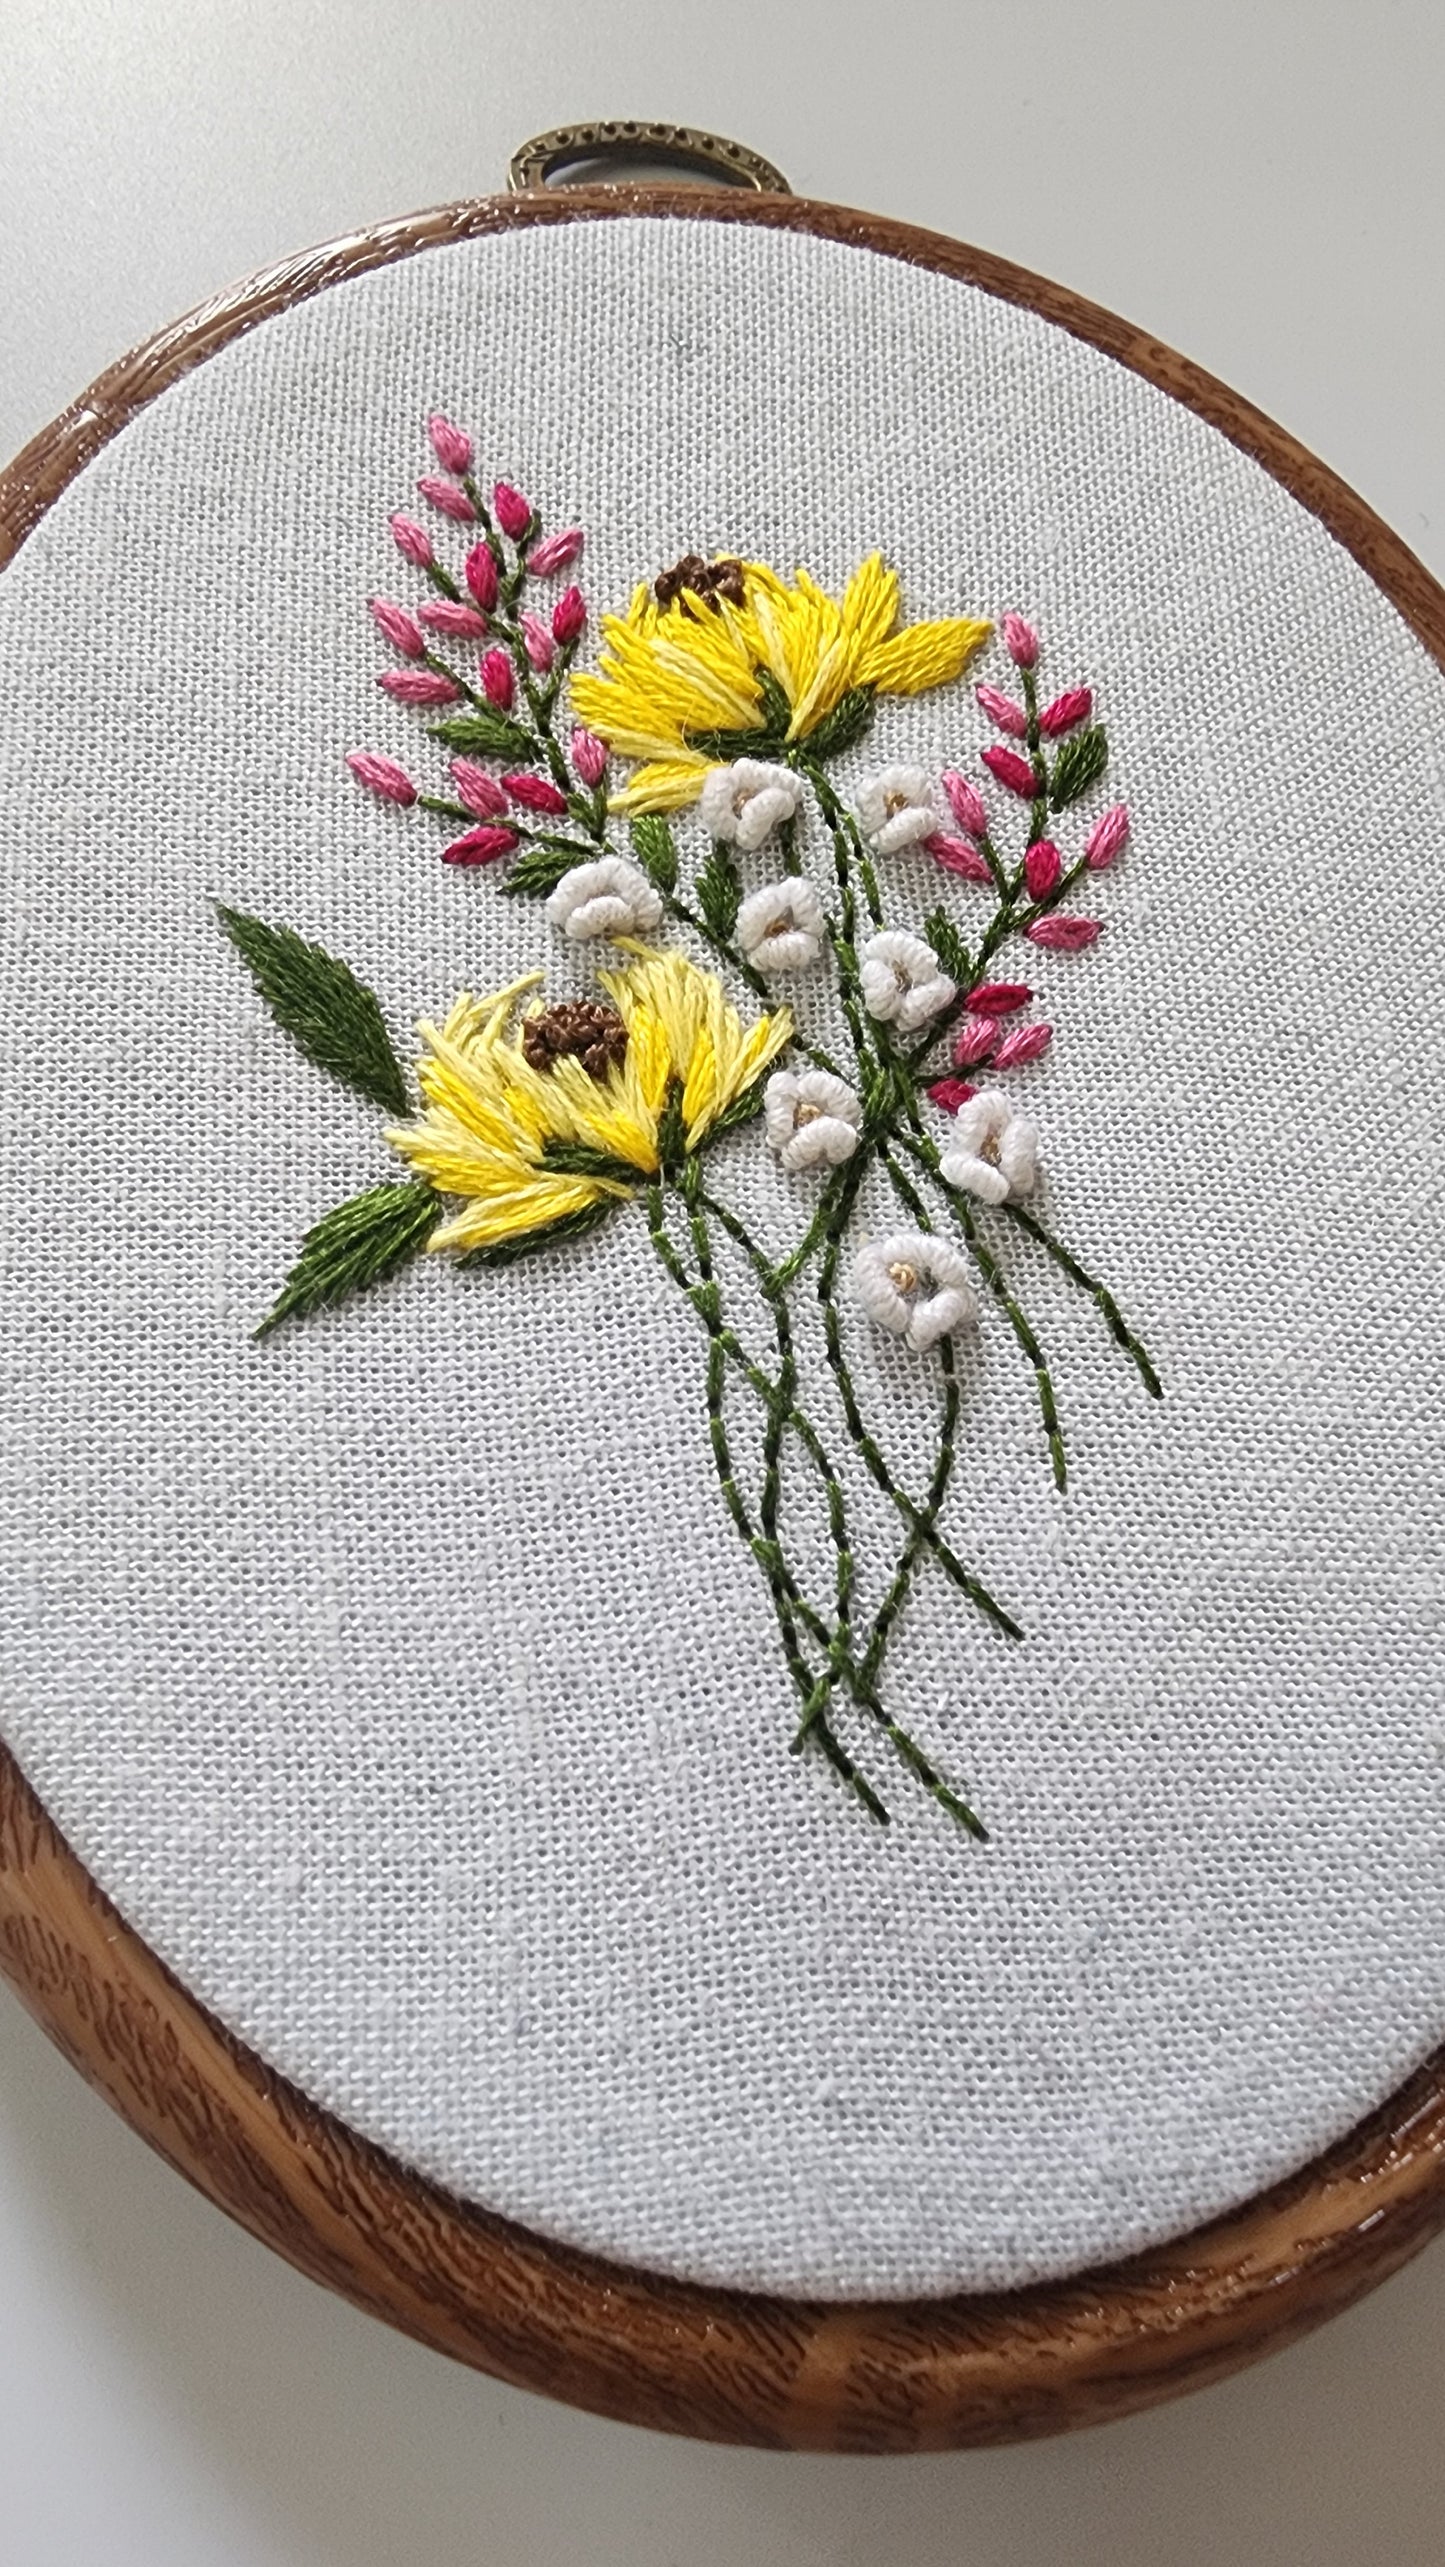 Ikali - Yellow Pink Flowers - Hand-embroidered Wall-hanging Hoop